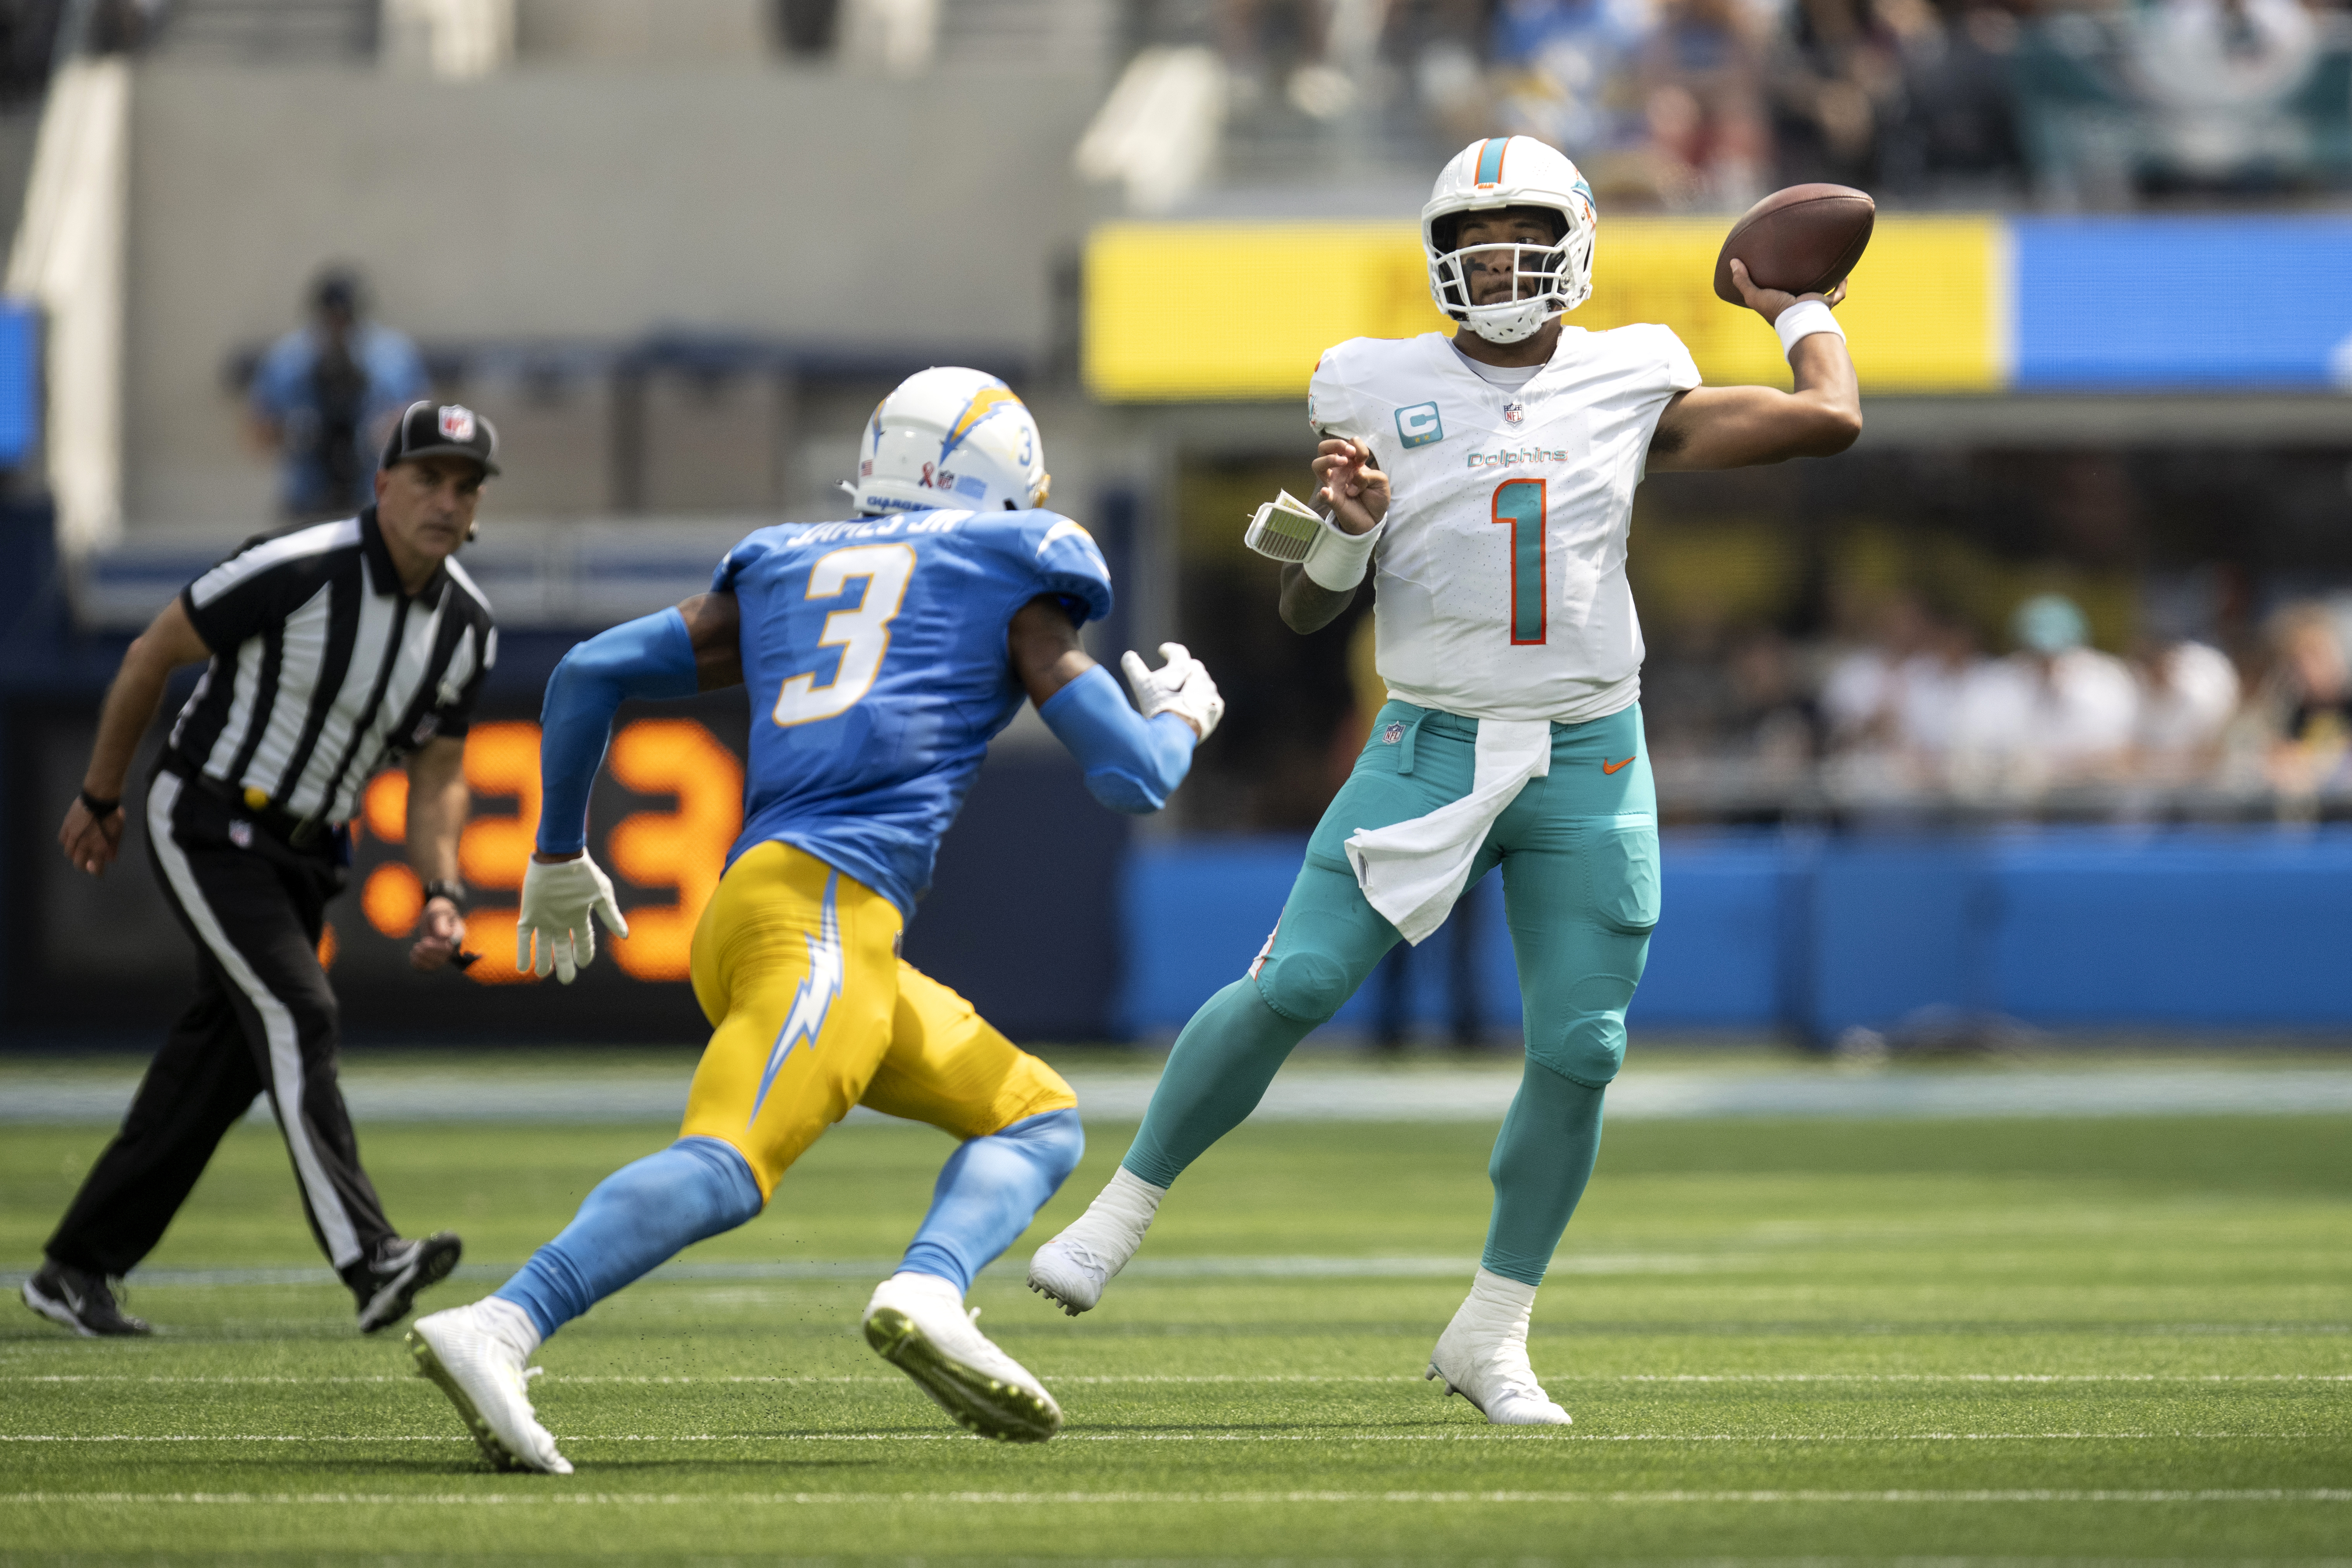 Why Dolphins would collapse without either Tyreek Hill or Tua